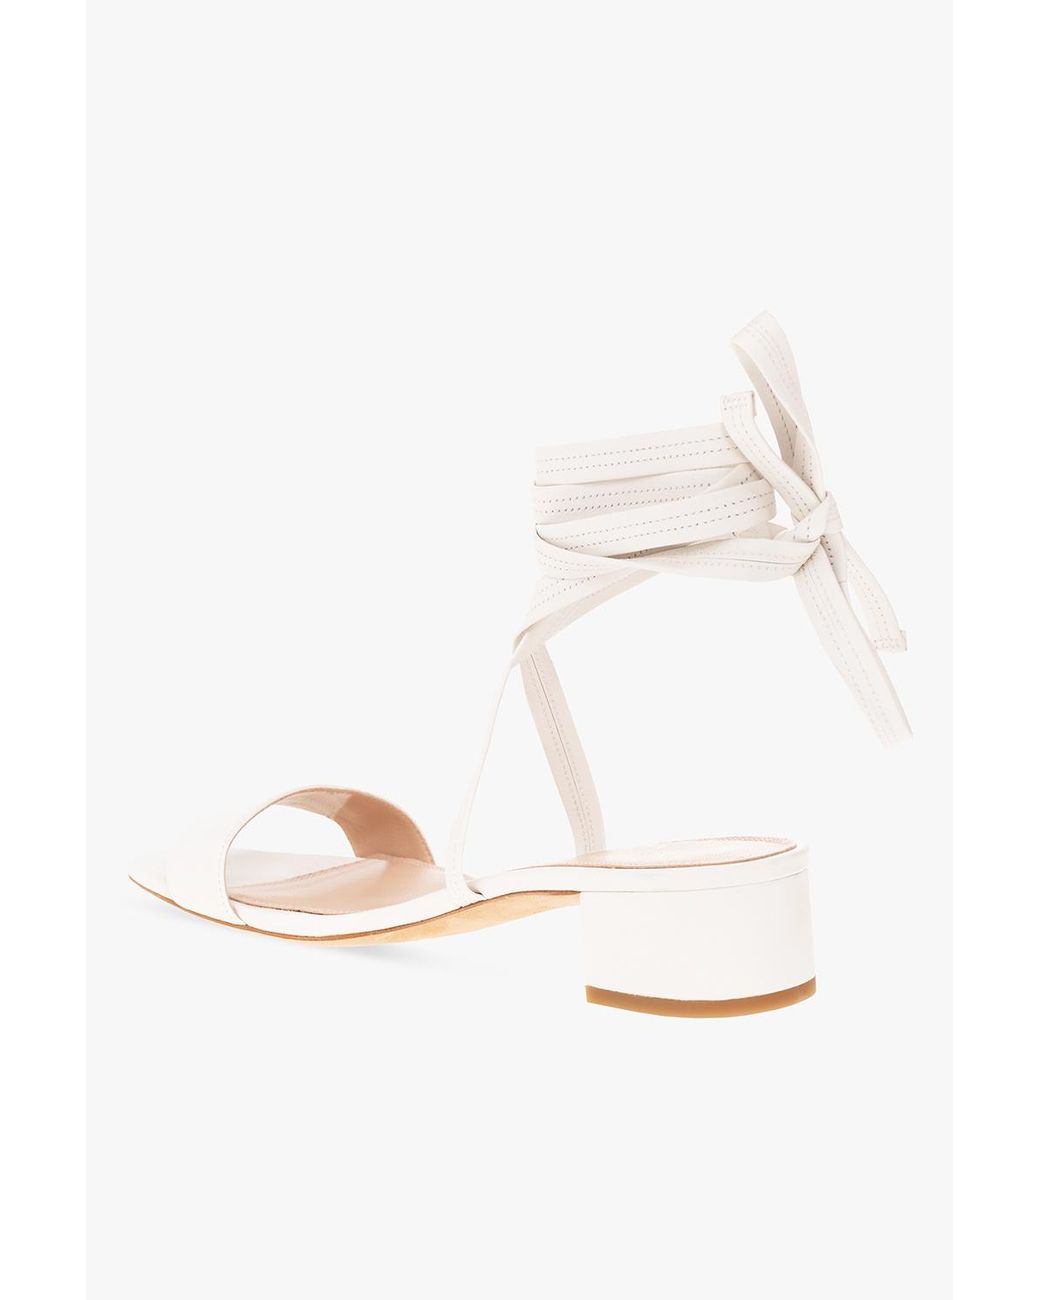 Kate Spade 'aphrodite' Sandals in White | Lyst UK